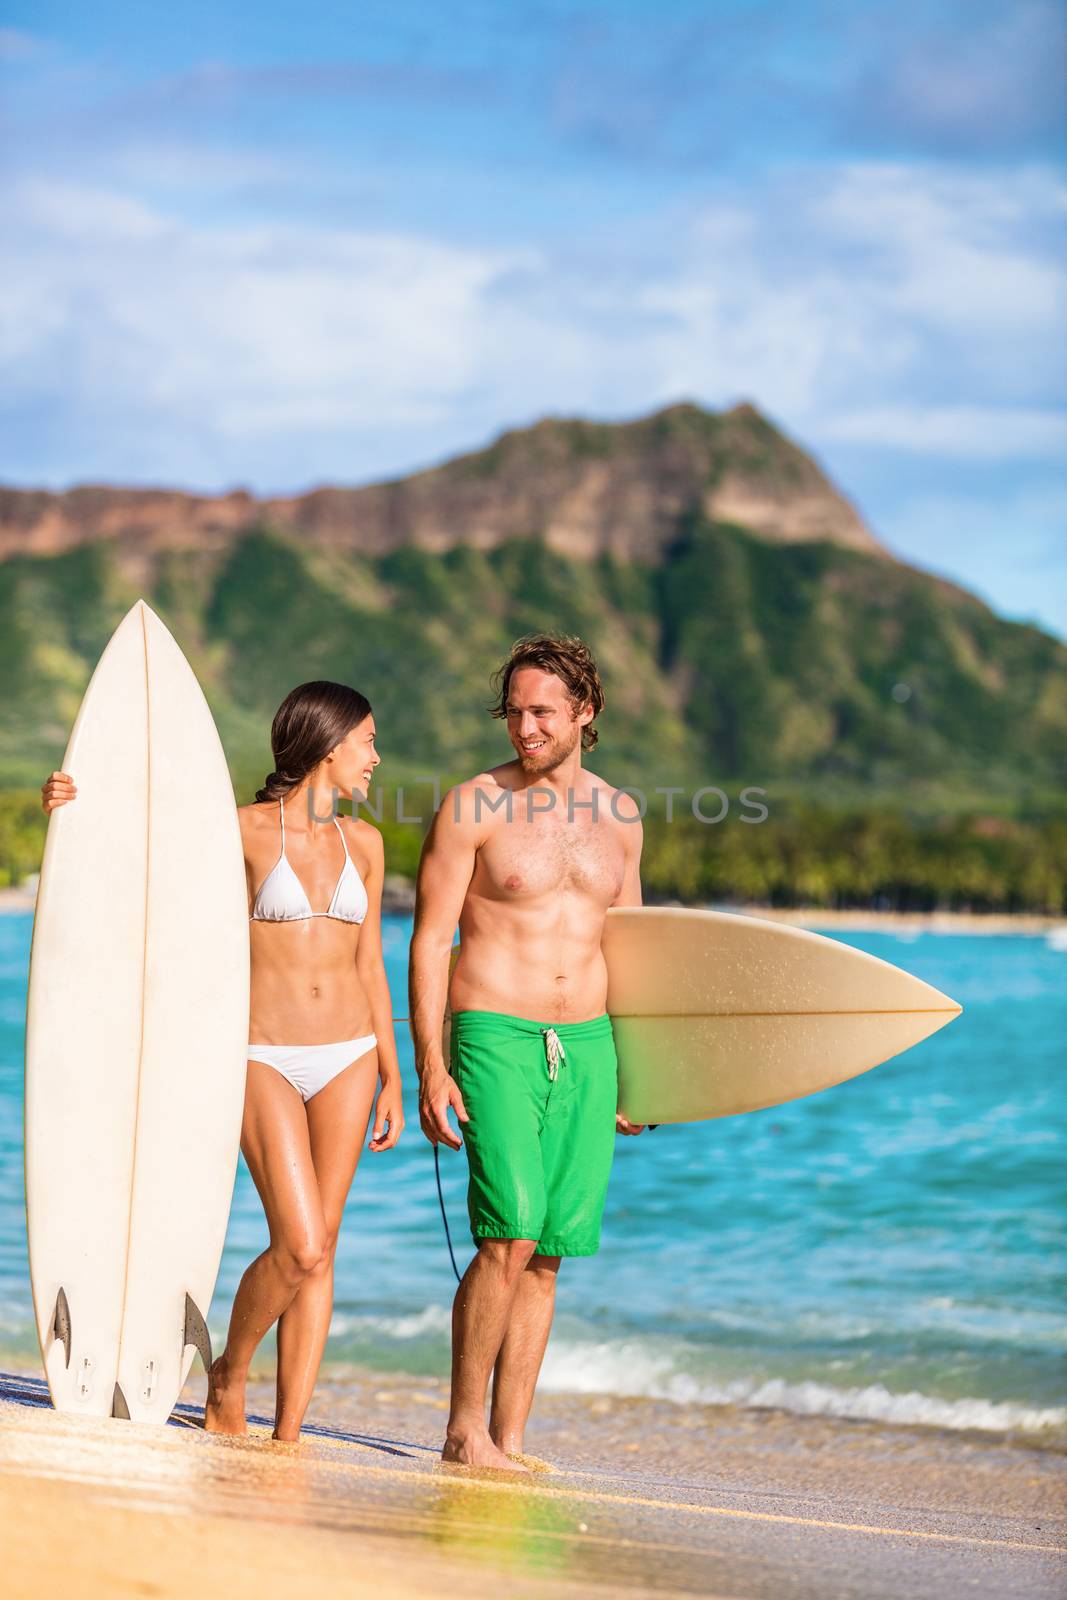 Beach couple surfing in Hawaii relaxing at sunset standing with surfboards on waikiki beach, Honolulu, Oahu, USA. Summer holidays travel landscape. Happy people having fun by Maridav